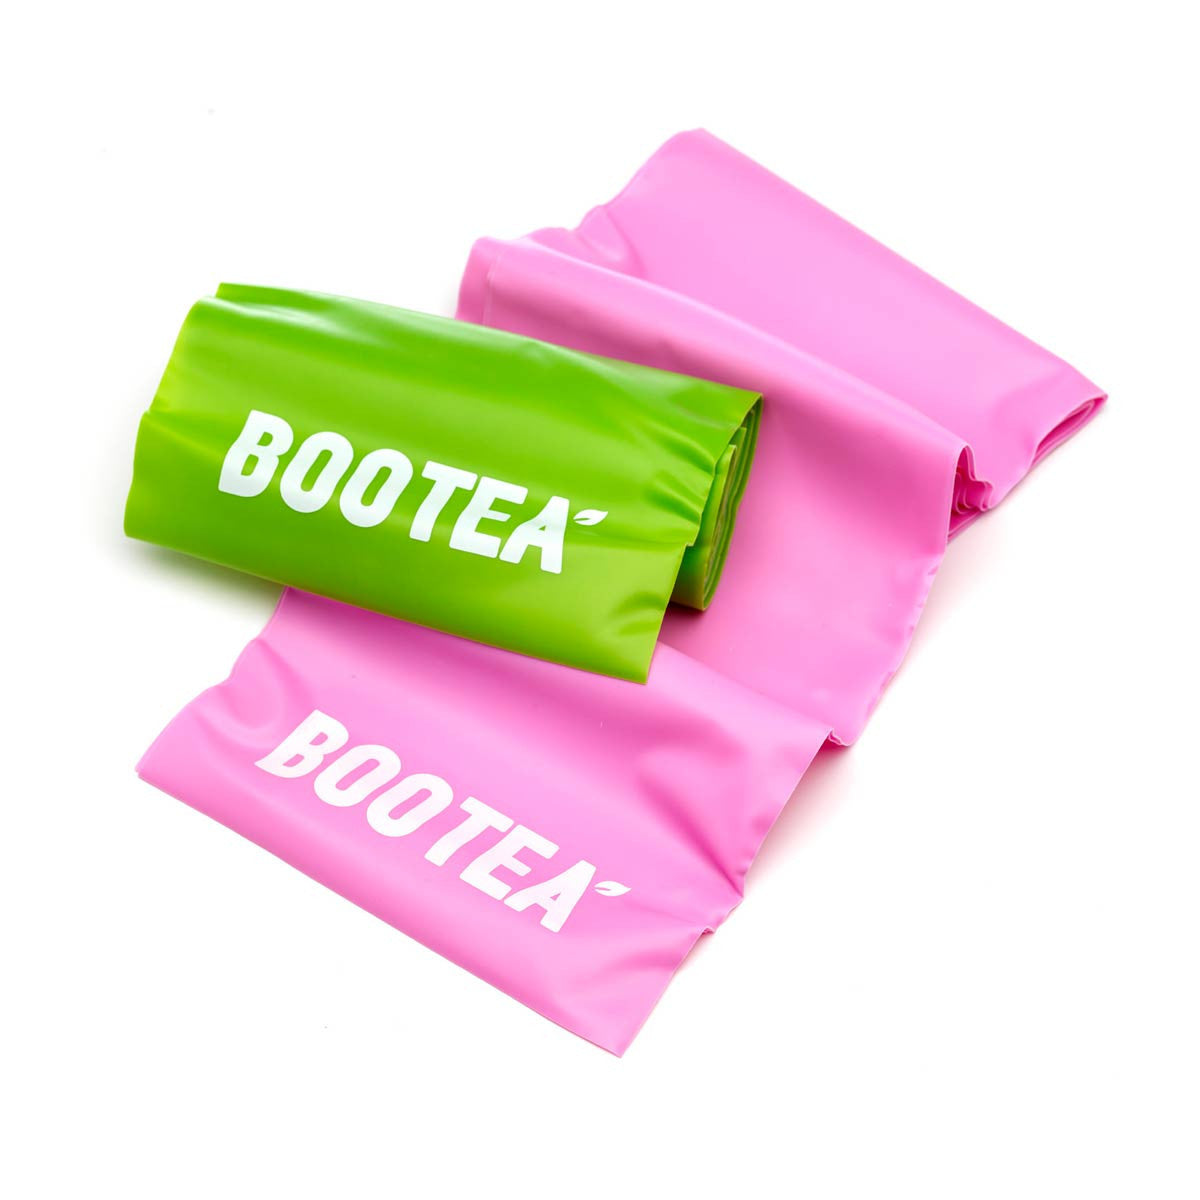 Bootea resistance bands in box